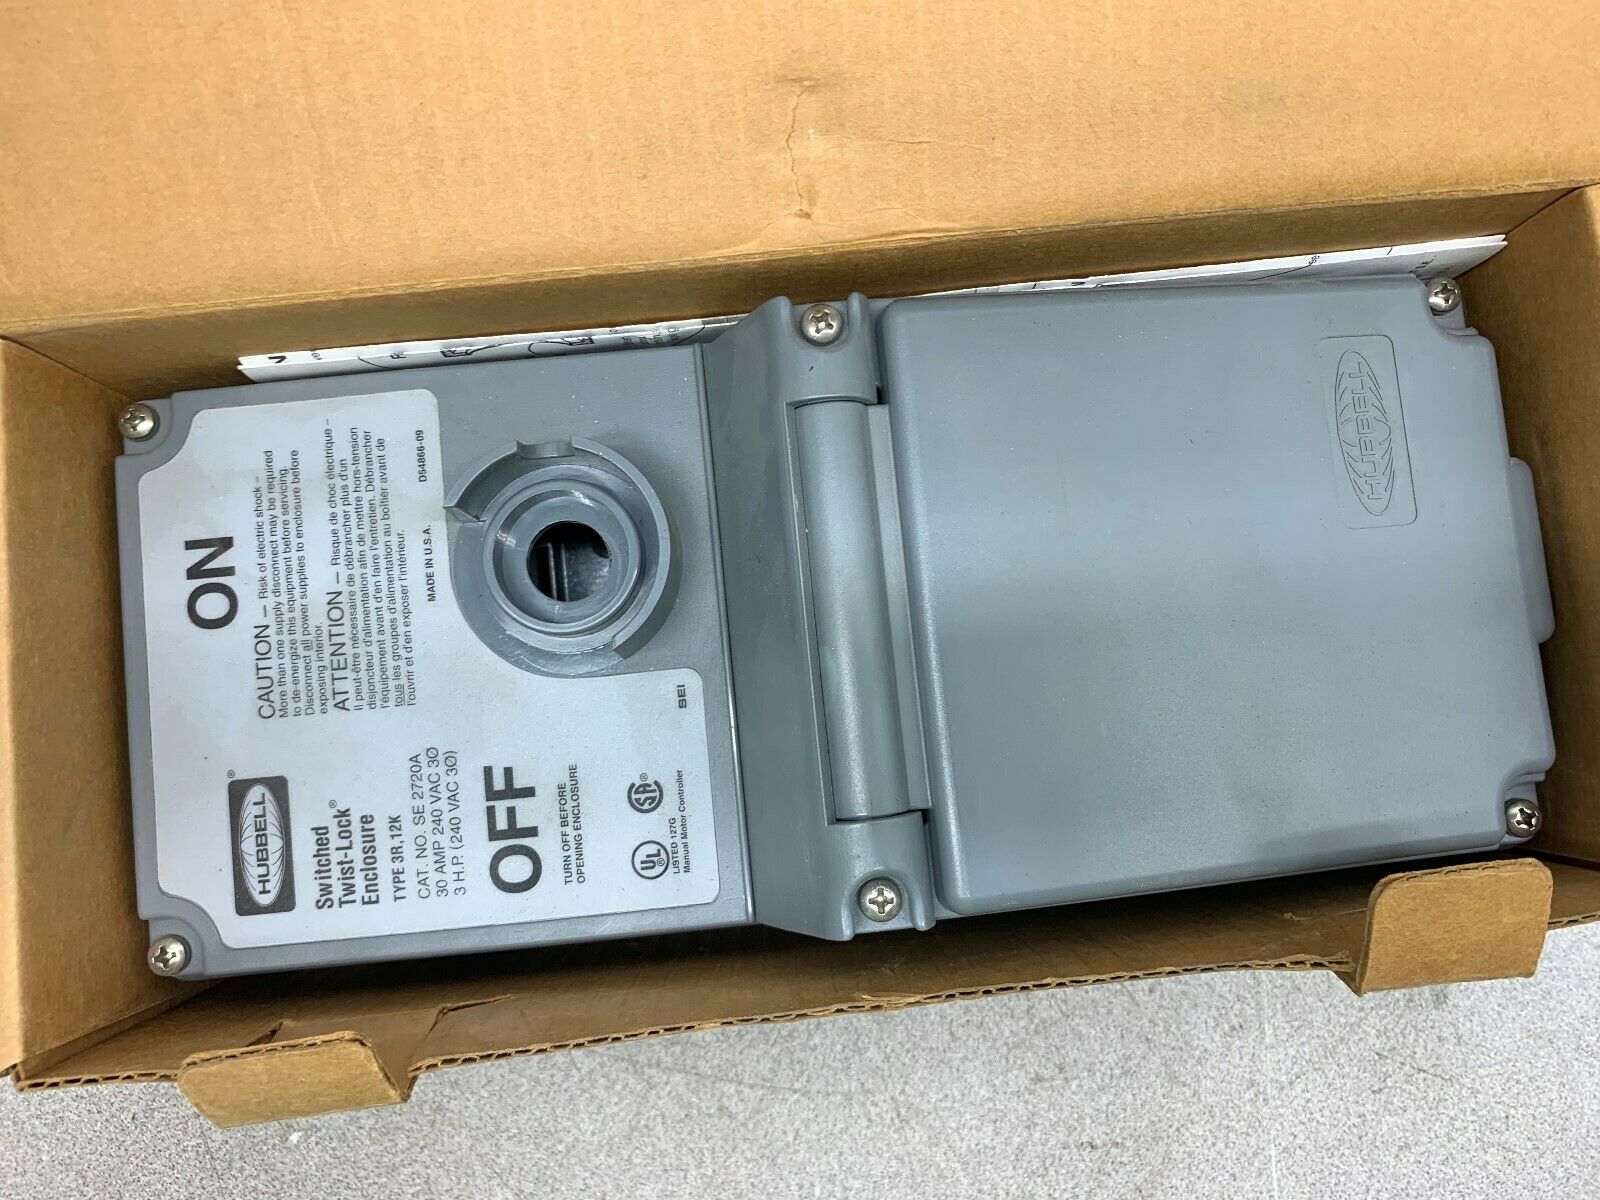 NEW IN BOX HUBBELL SWITCHED ENCLOSURE TWIST-LOCK SE2720A